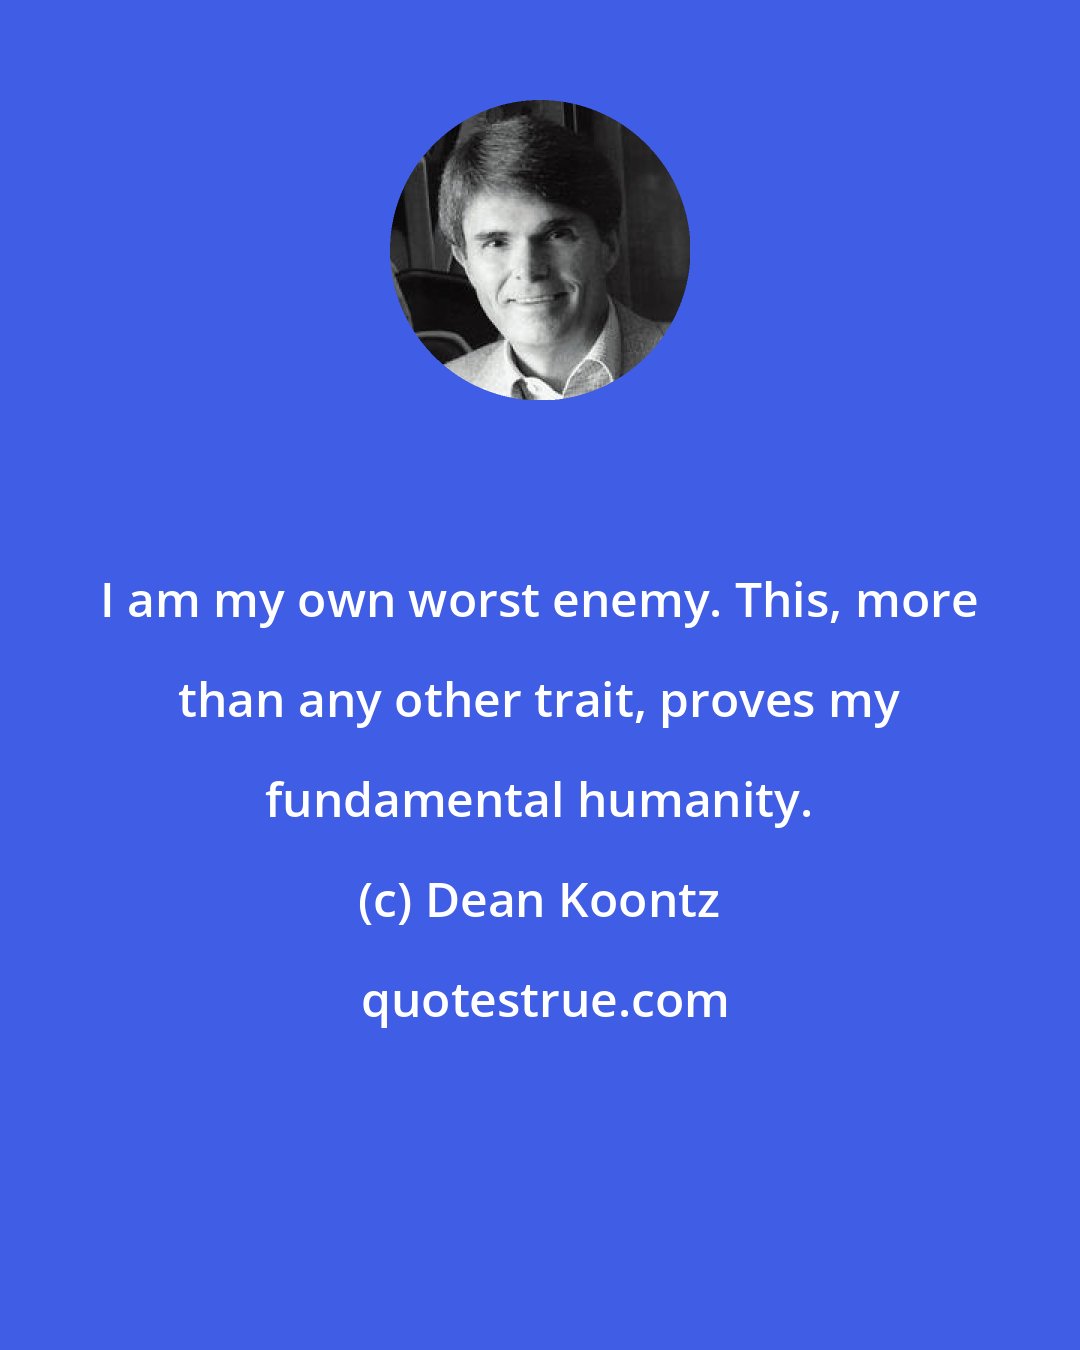 Dean Koontz: I am my own worst enemy. This, more than any other trait, proves my fundamental humanity.